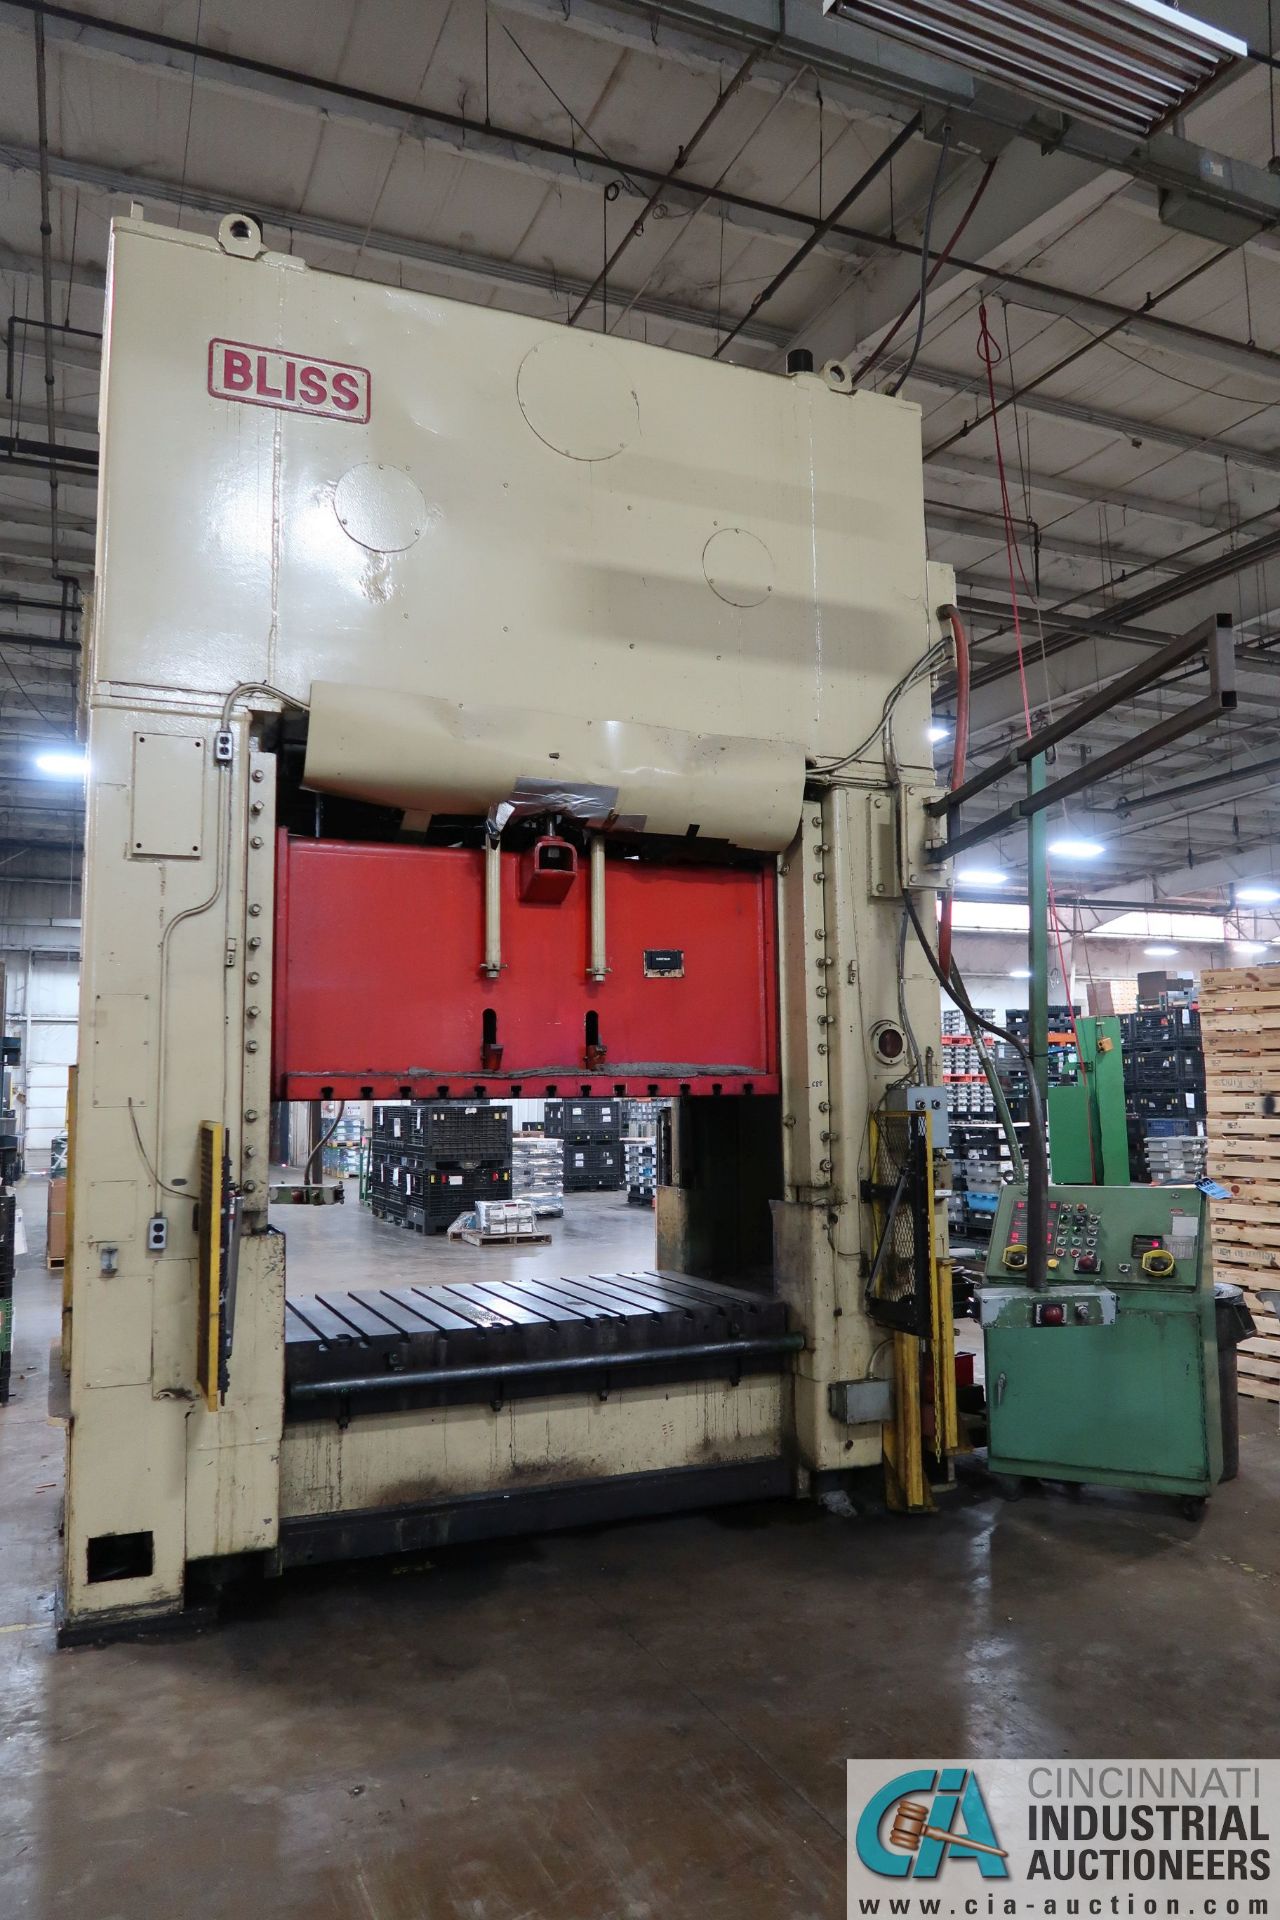 *****300 TON BLISS MODEL SE2-300-84-48 SSDC PRESS - Located offsite